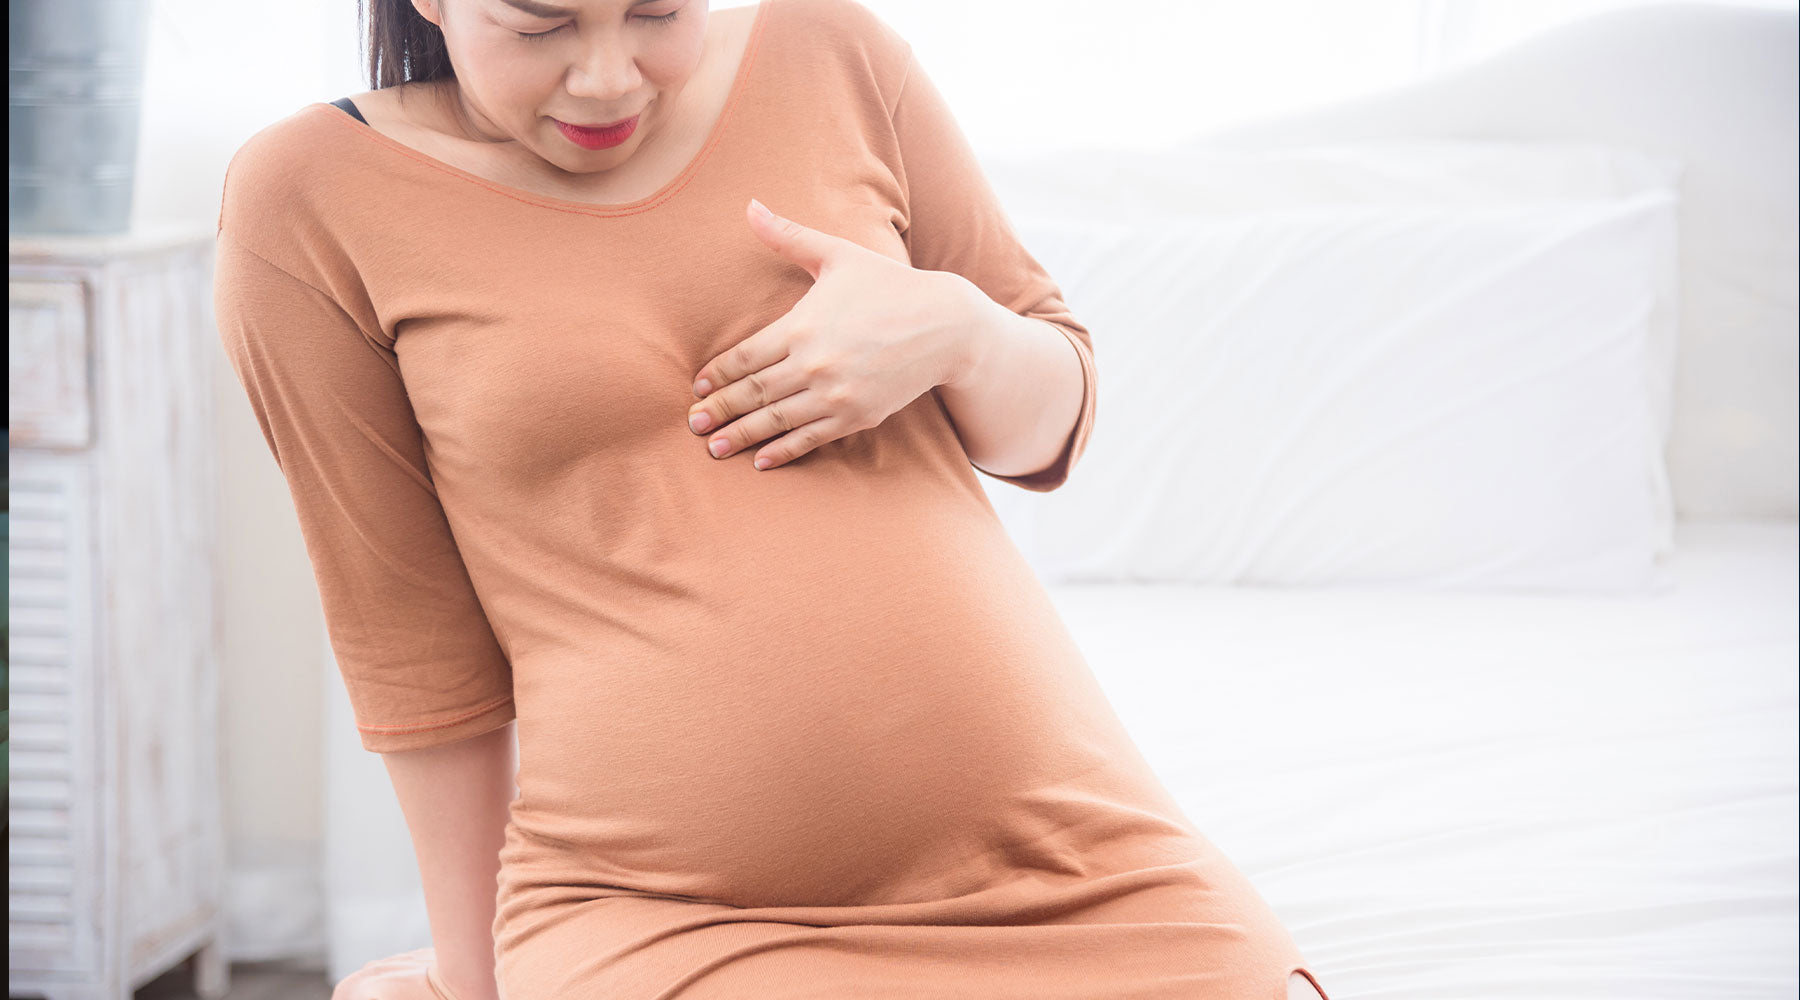 Pregnant woman suffering from acid reflux